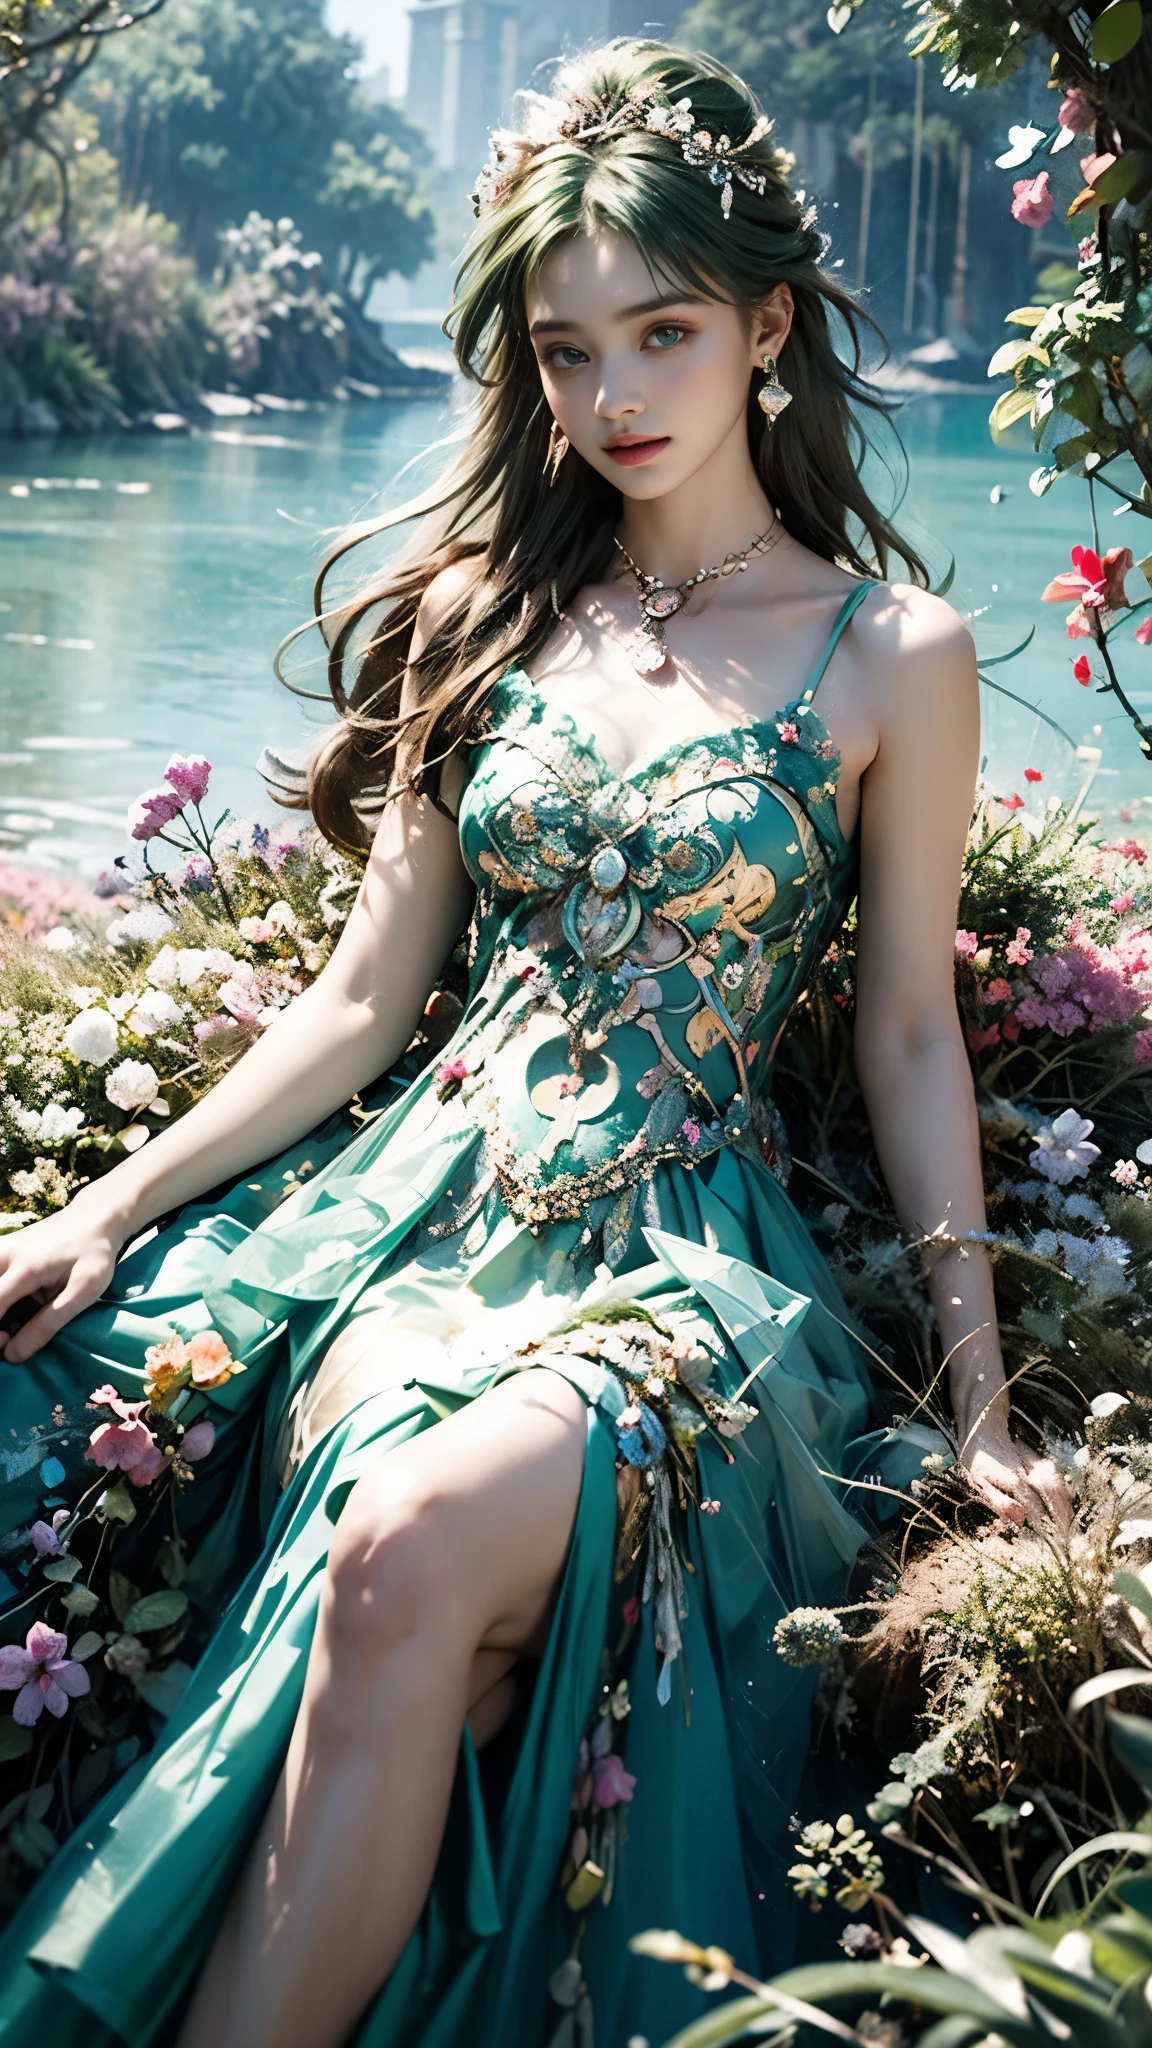 8K, ultra hd, masterpiece, 1 girl, (good face:1.4), detailed eyes, very long hair, impressive hairstyle, earings, necklace, small breasts, (green dress:1.5), see-through, (fantasy dress:1.5) Light-colored foundation brings out the transparency of the skin, (in the wonderland:1.5), mystery, diwali lights, glowing lights, very decoration, The lights falls like water, perfect body, sitting,